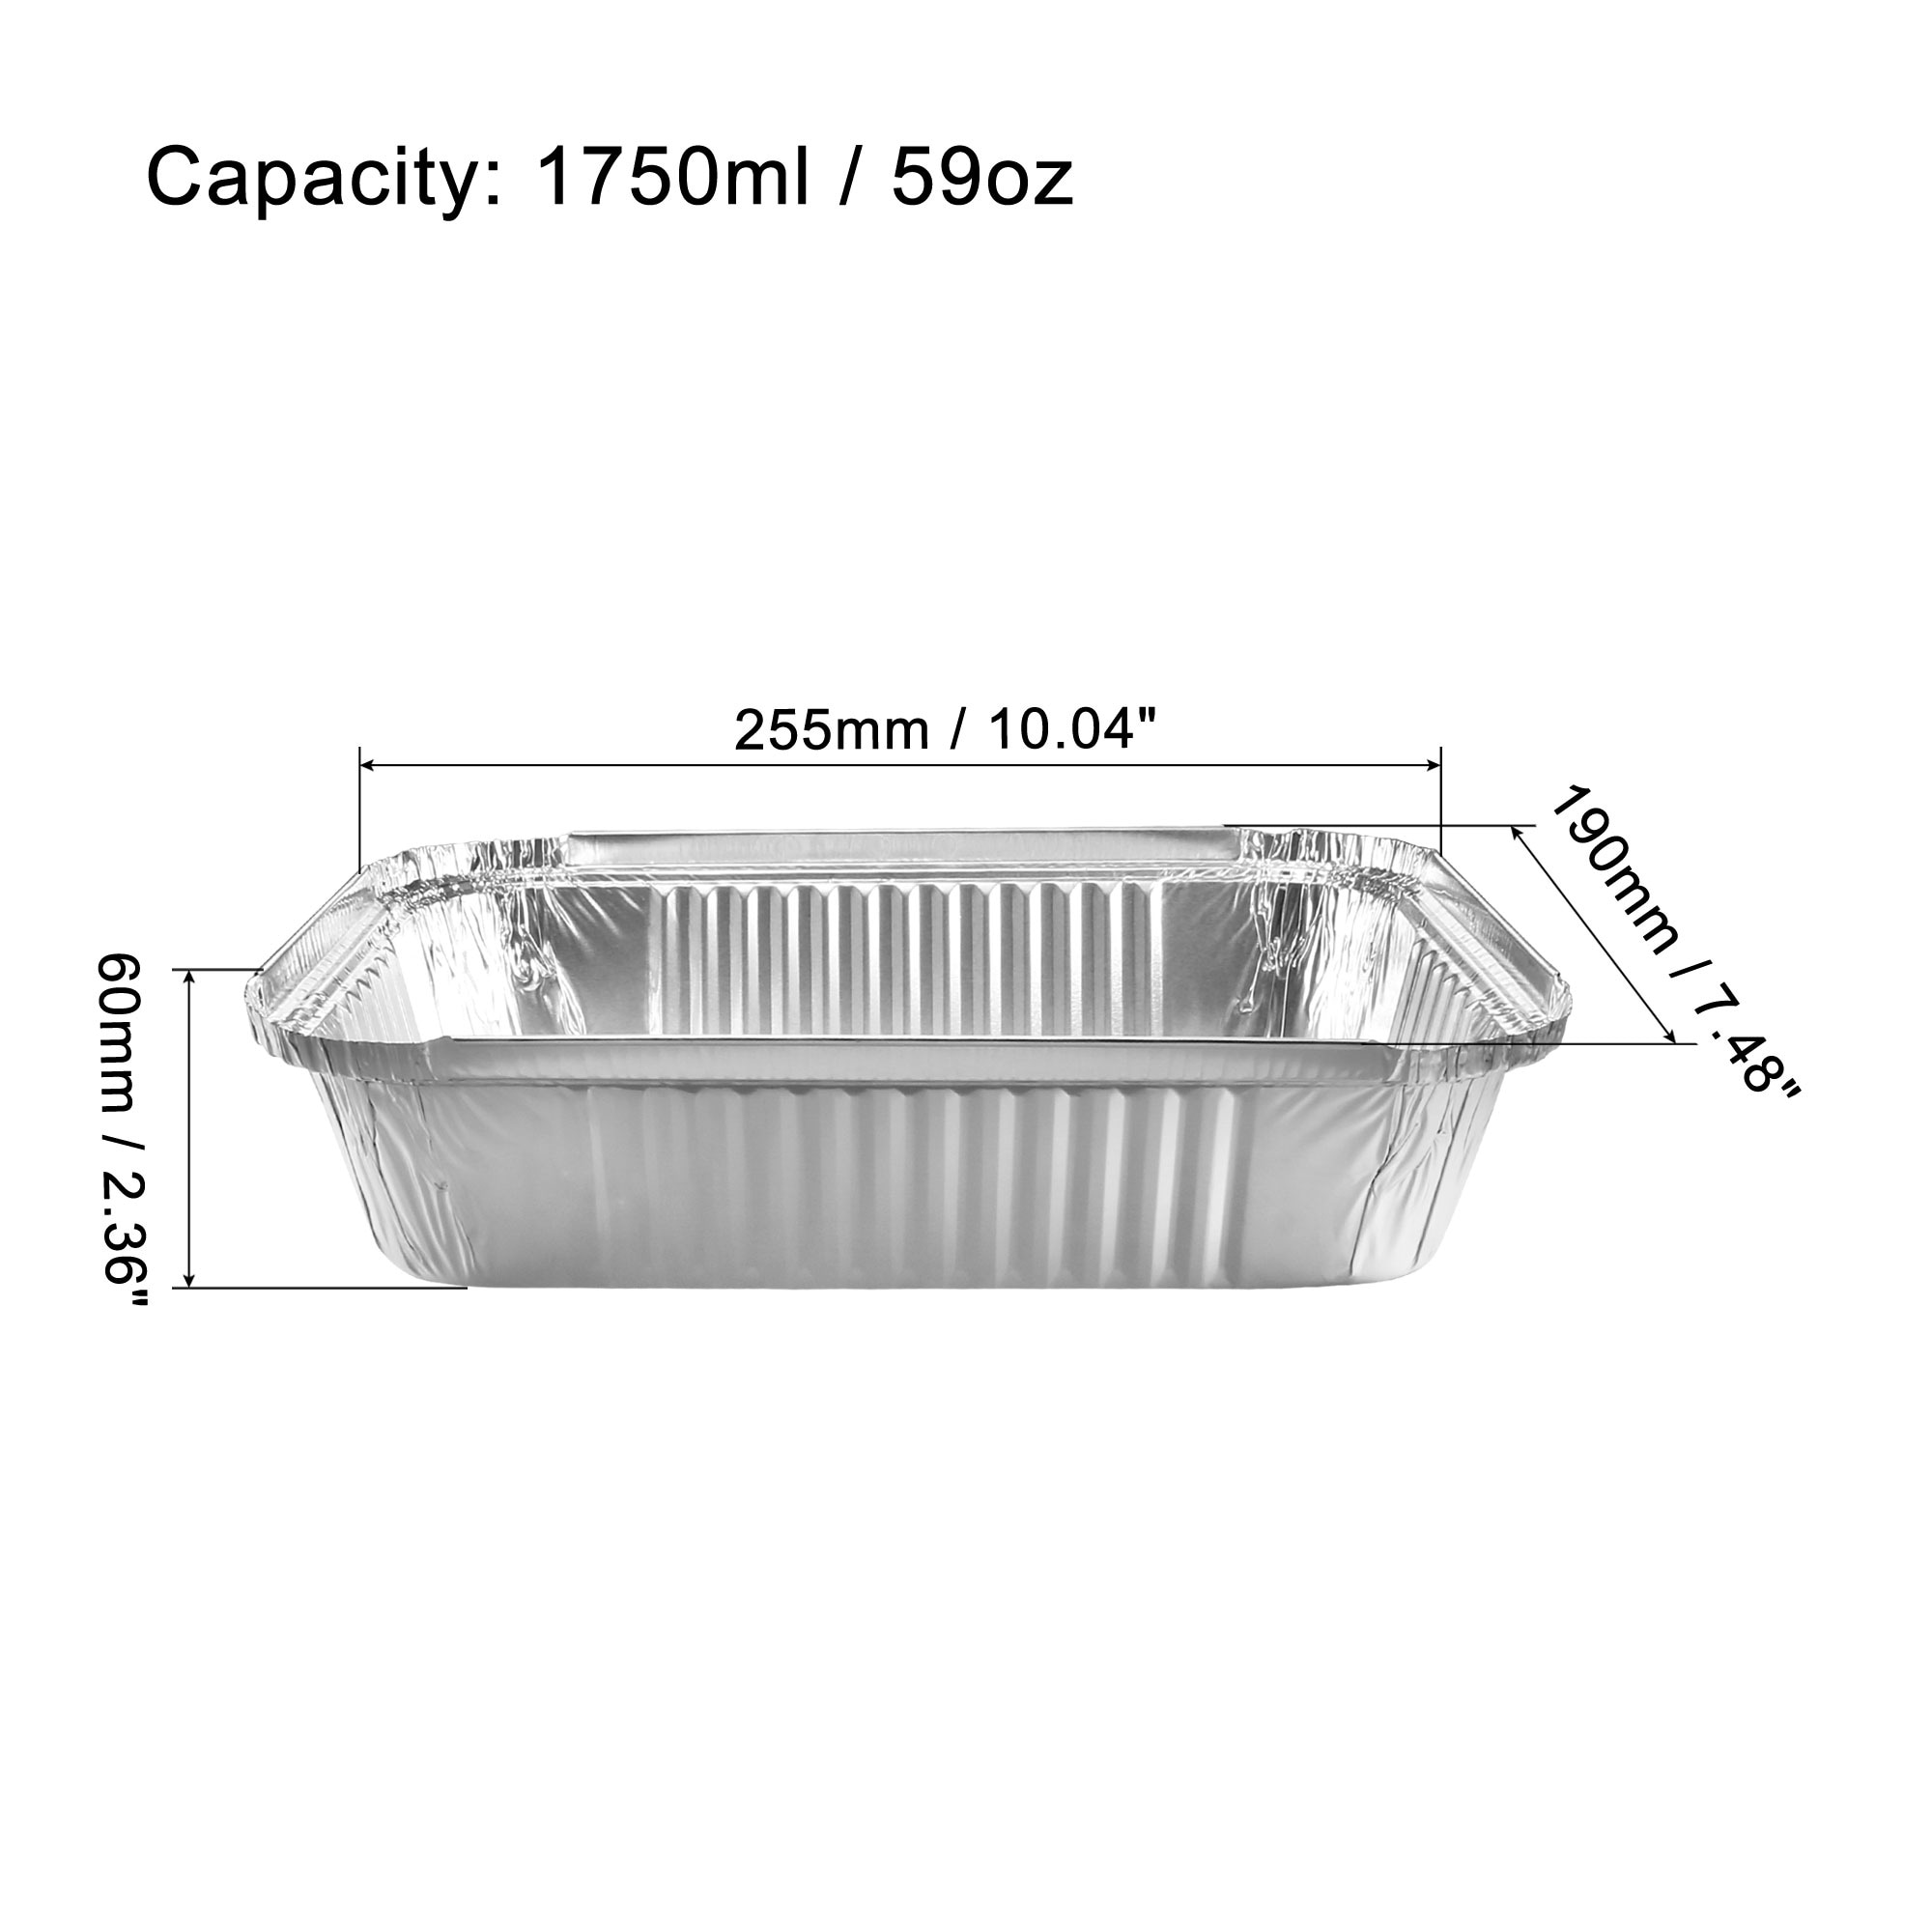 https://ak1.ostkcdn.com/images/products/is/images/direct/58729059747041799bf73c3ac64d85bd31250063/Aluminum-Foil-Pans%2C-Disposable-Tray-Containers-for-Kitchen-Roasting-Co.jpg